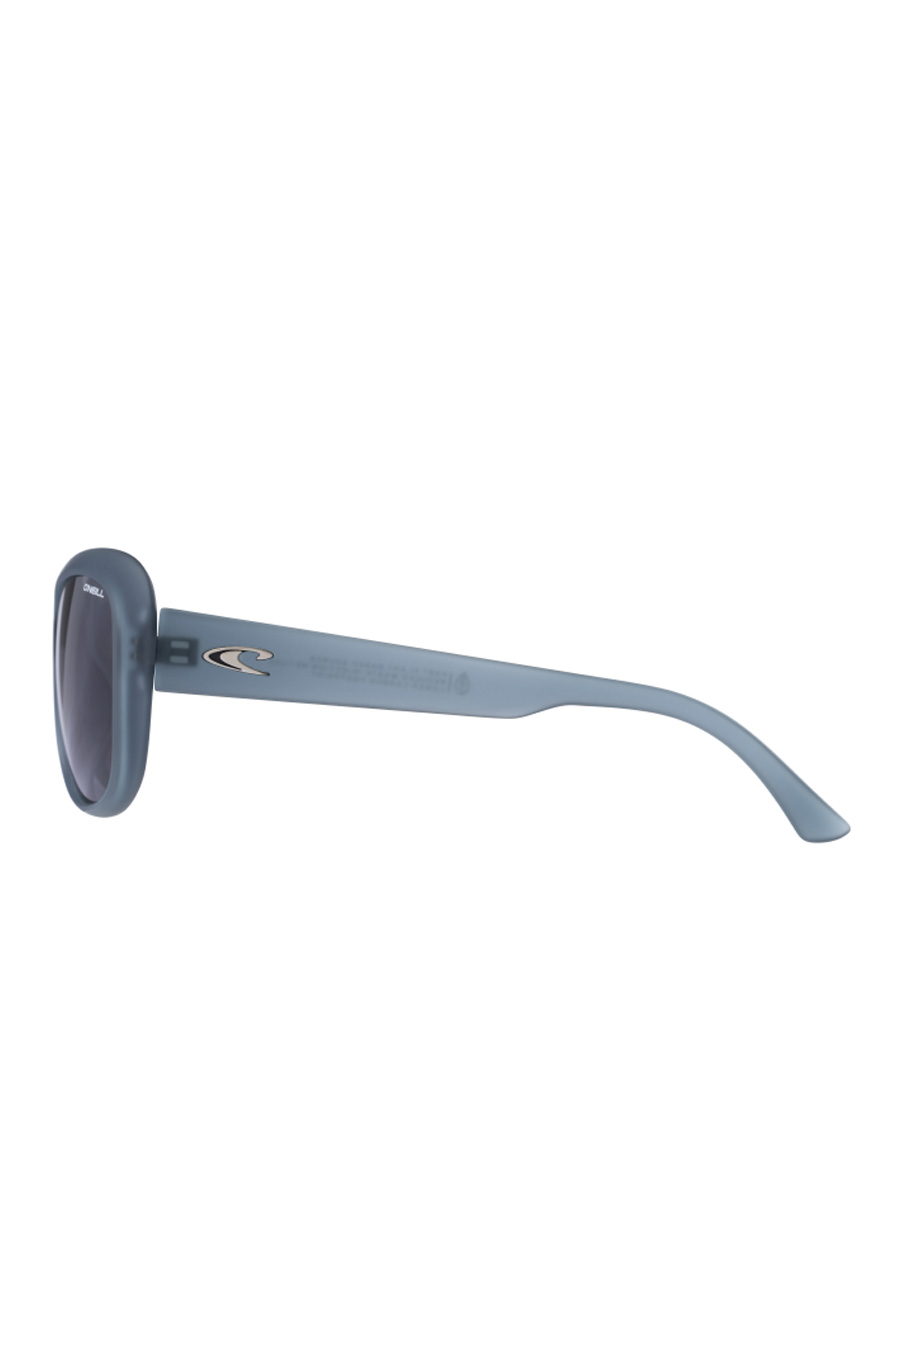 Saulesbrilles ONEILL ONS-9010-20-105P